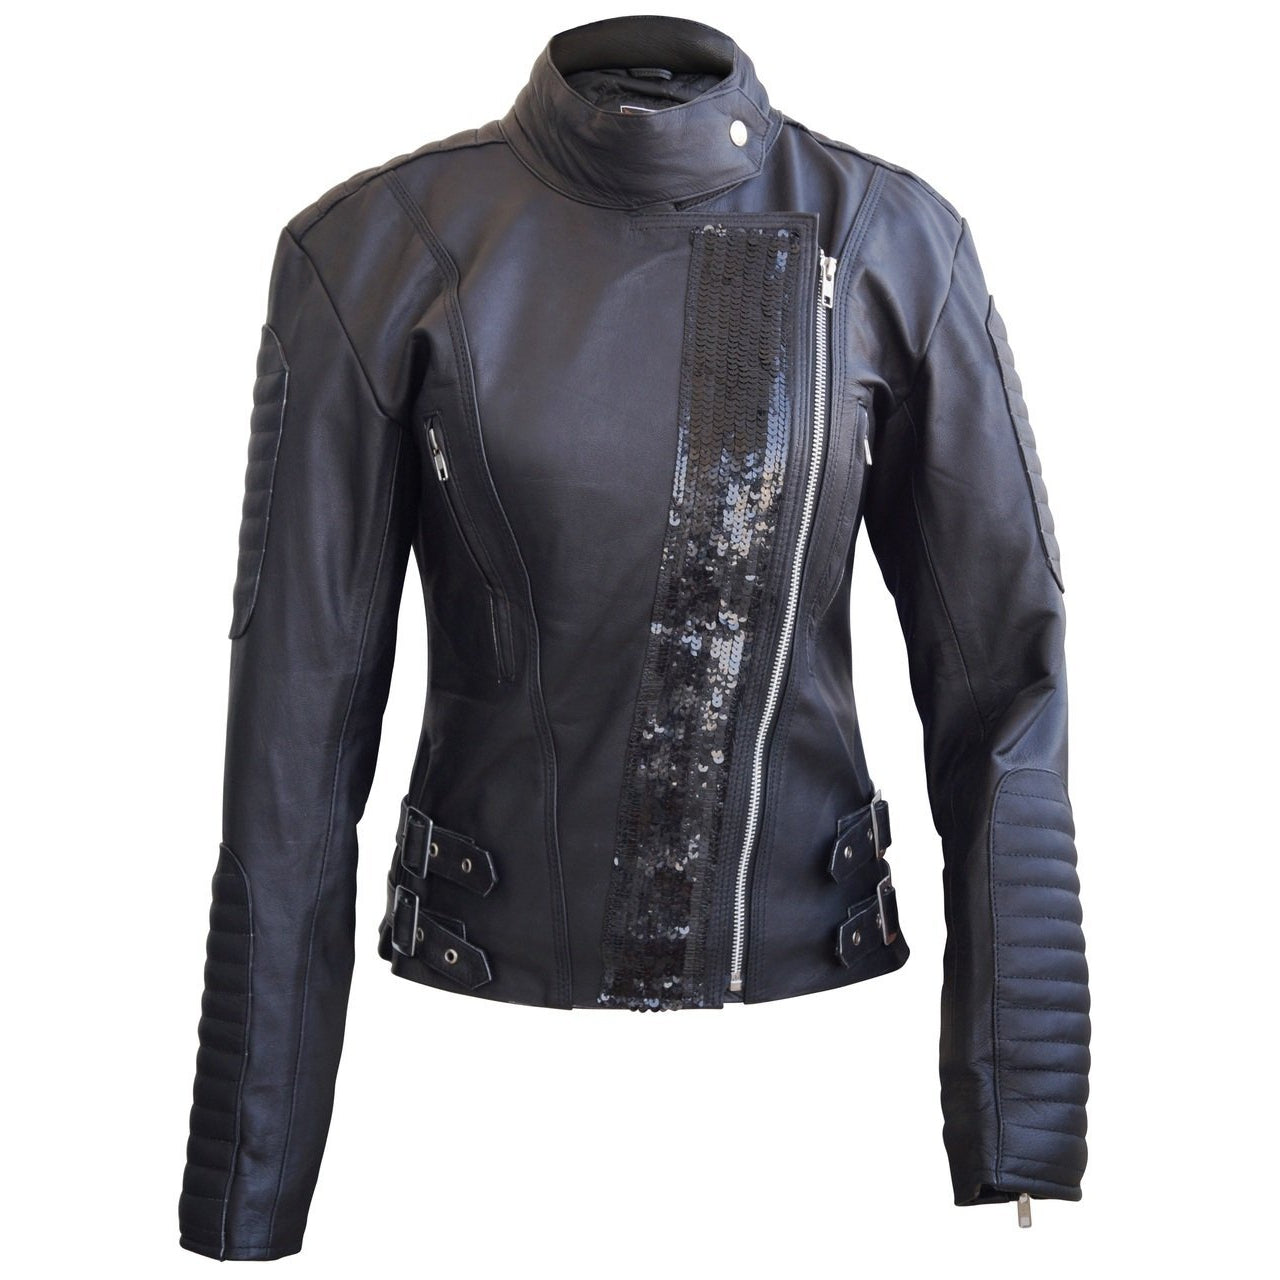 Home / Products / Leather Skin Women Black Genuine Leather Jacket with ...